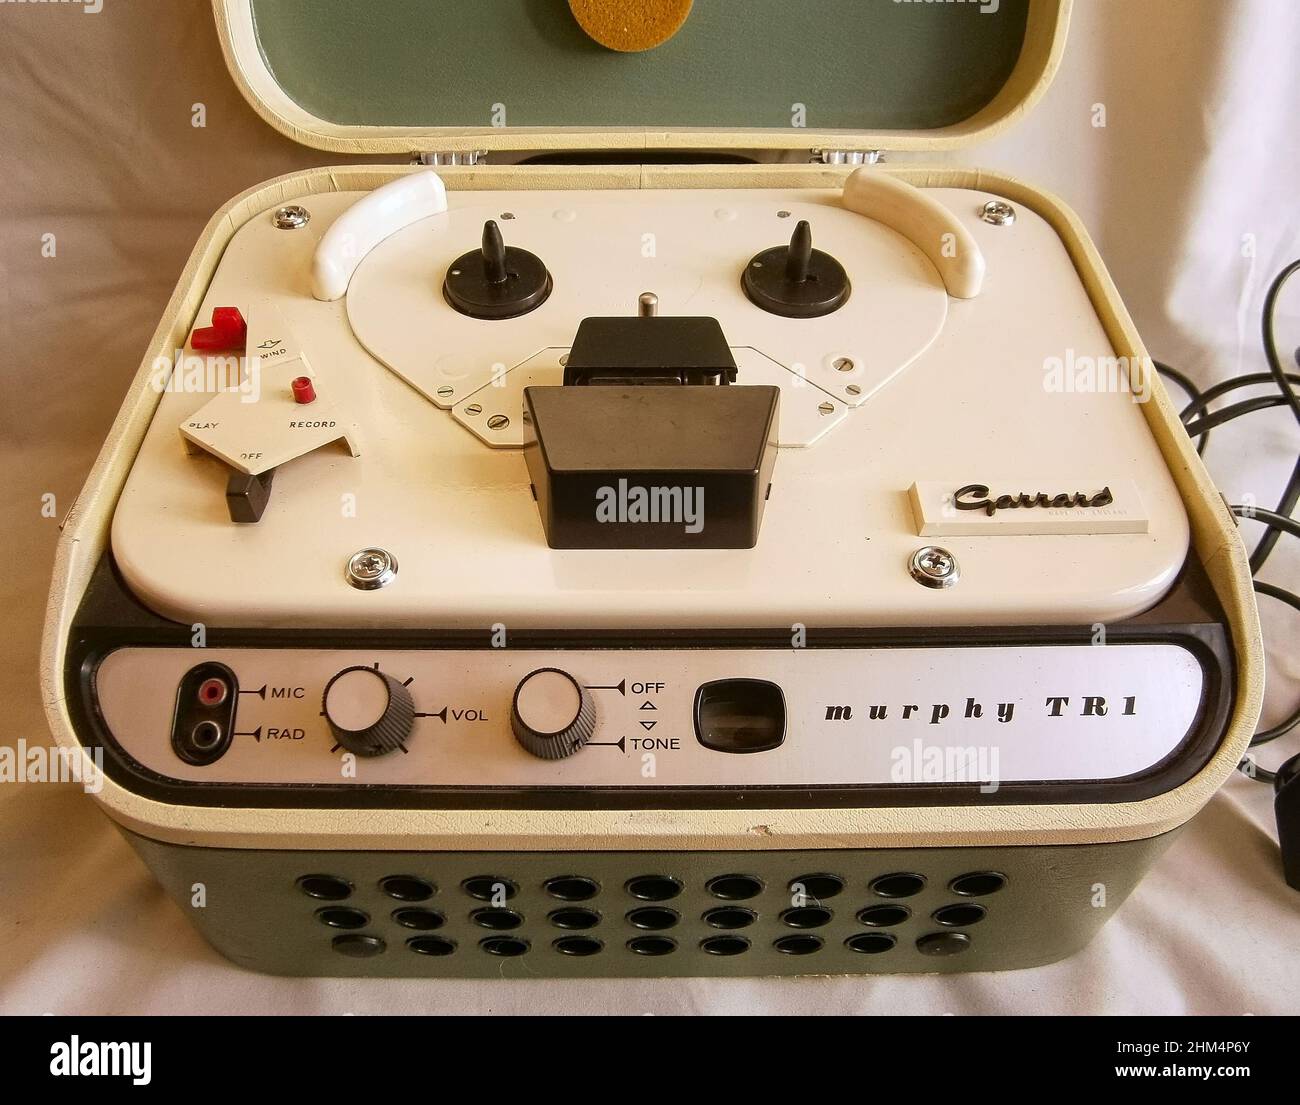 Murphy TR1 vintage reel to reel tape recorder made in England in the early  1960s Stock Photo - Alamy